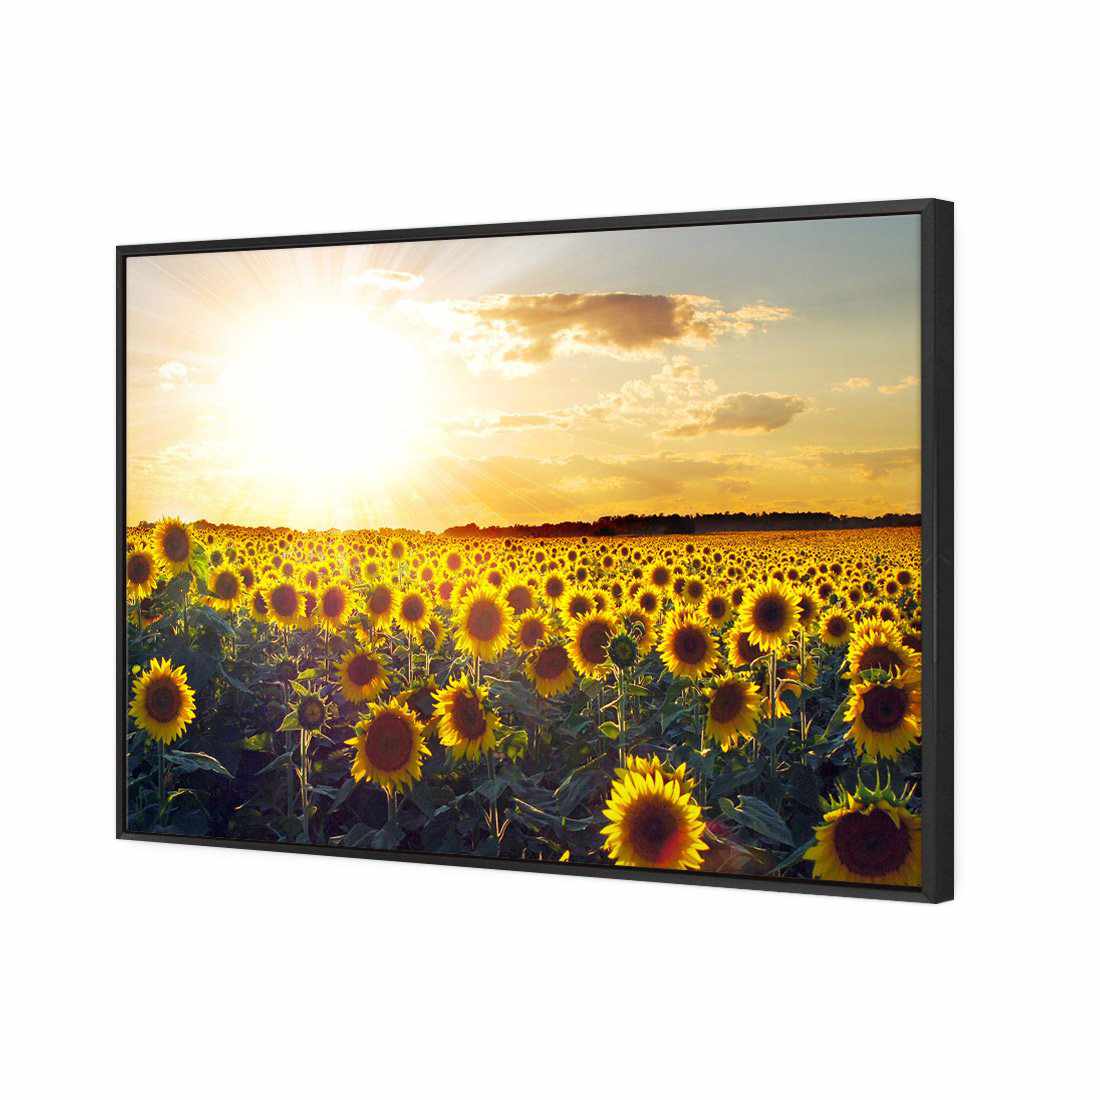 Sunflowers At Sunset Canvas Art-Canvas-Wall Art Designs-45x30cm-Canvas - Black Frame-Wall Art Designs